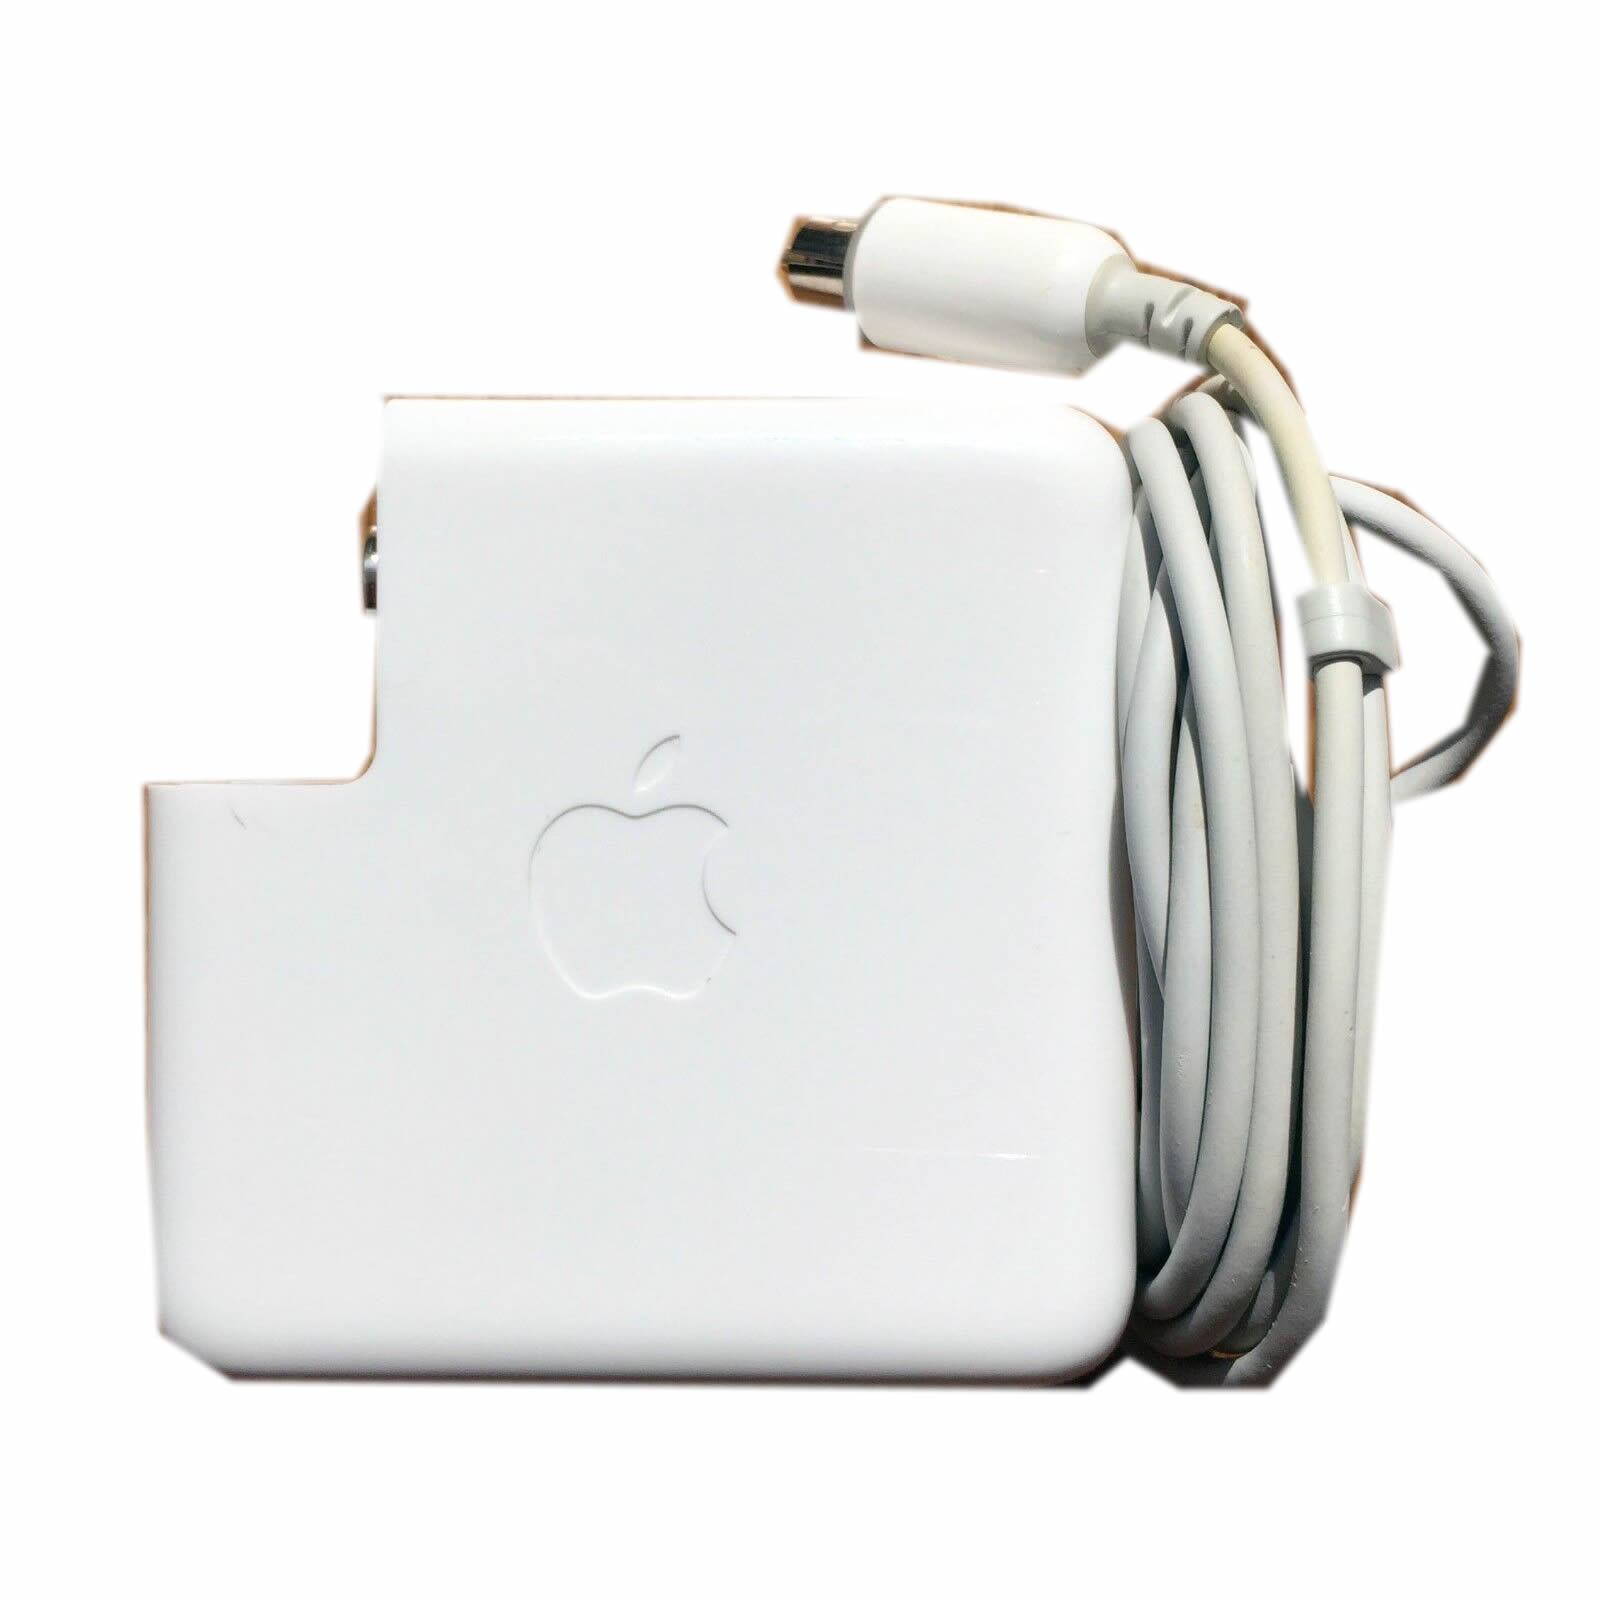 apple powerbook g4 15.2-inch m8591s/a laptop ac adapter